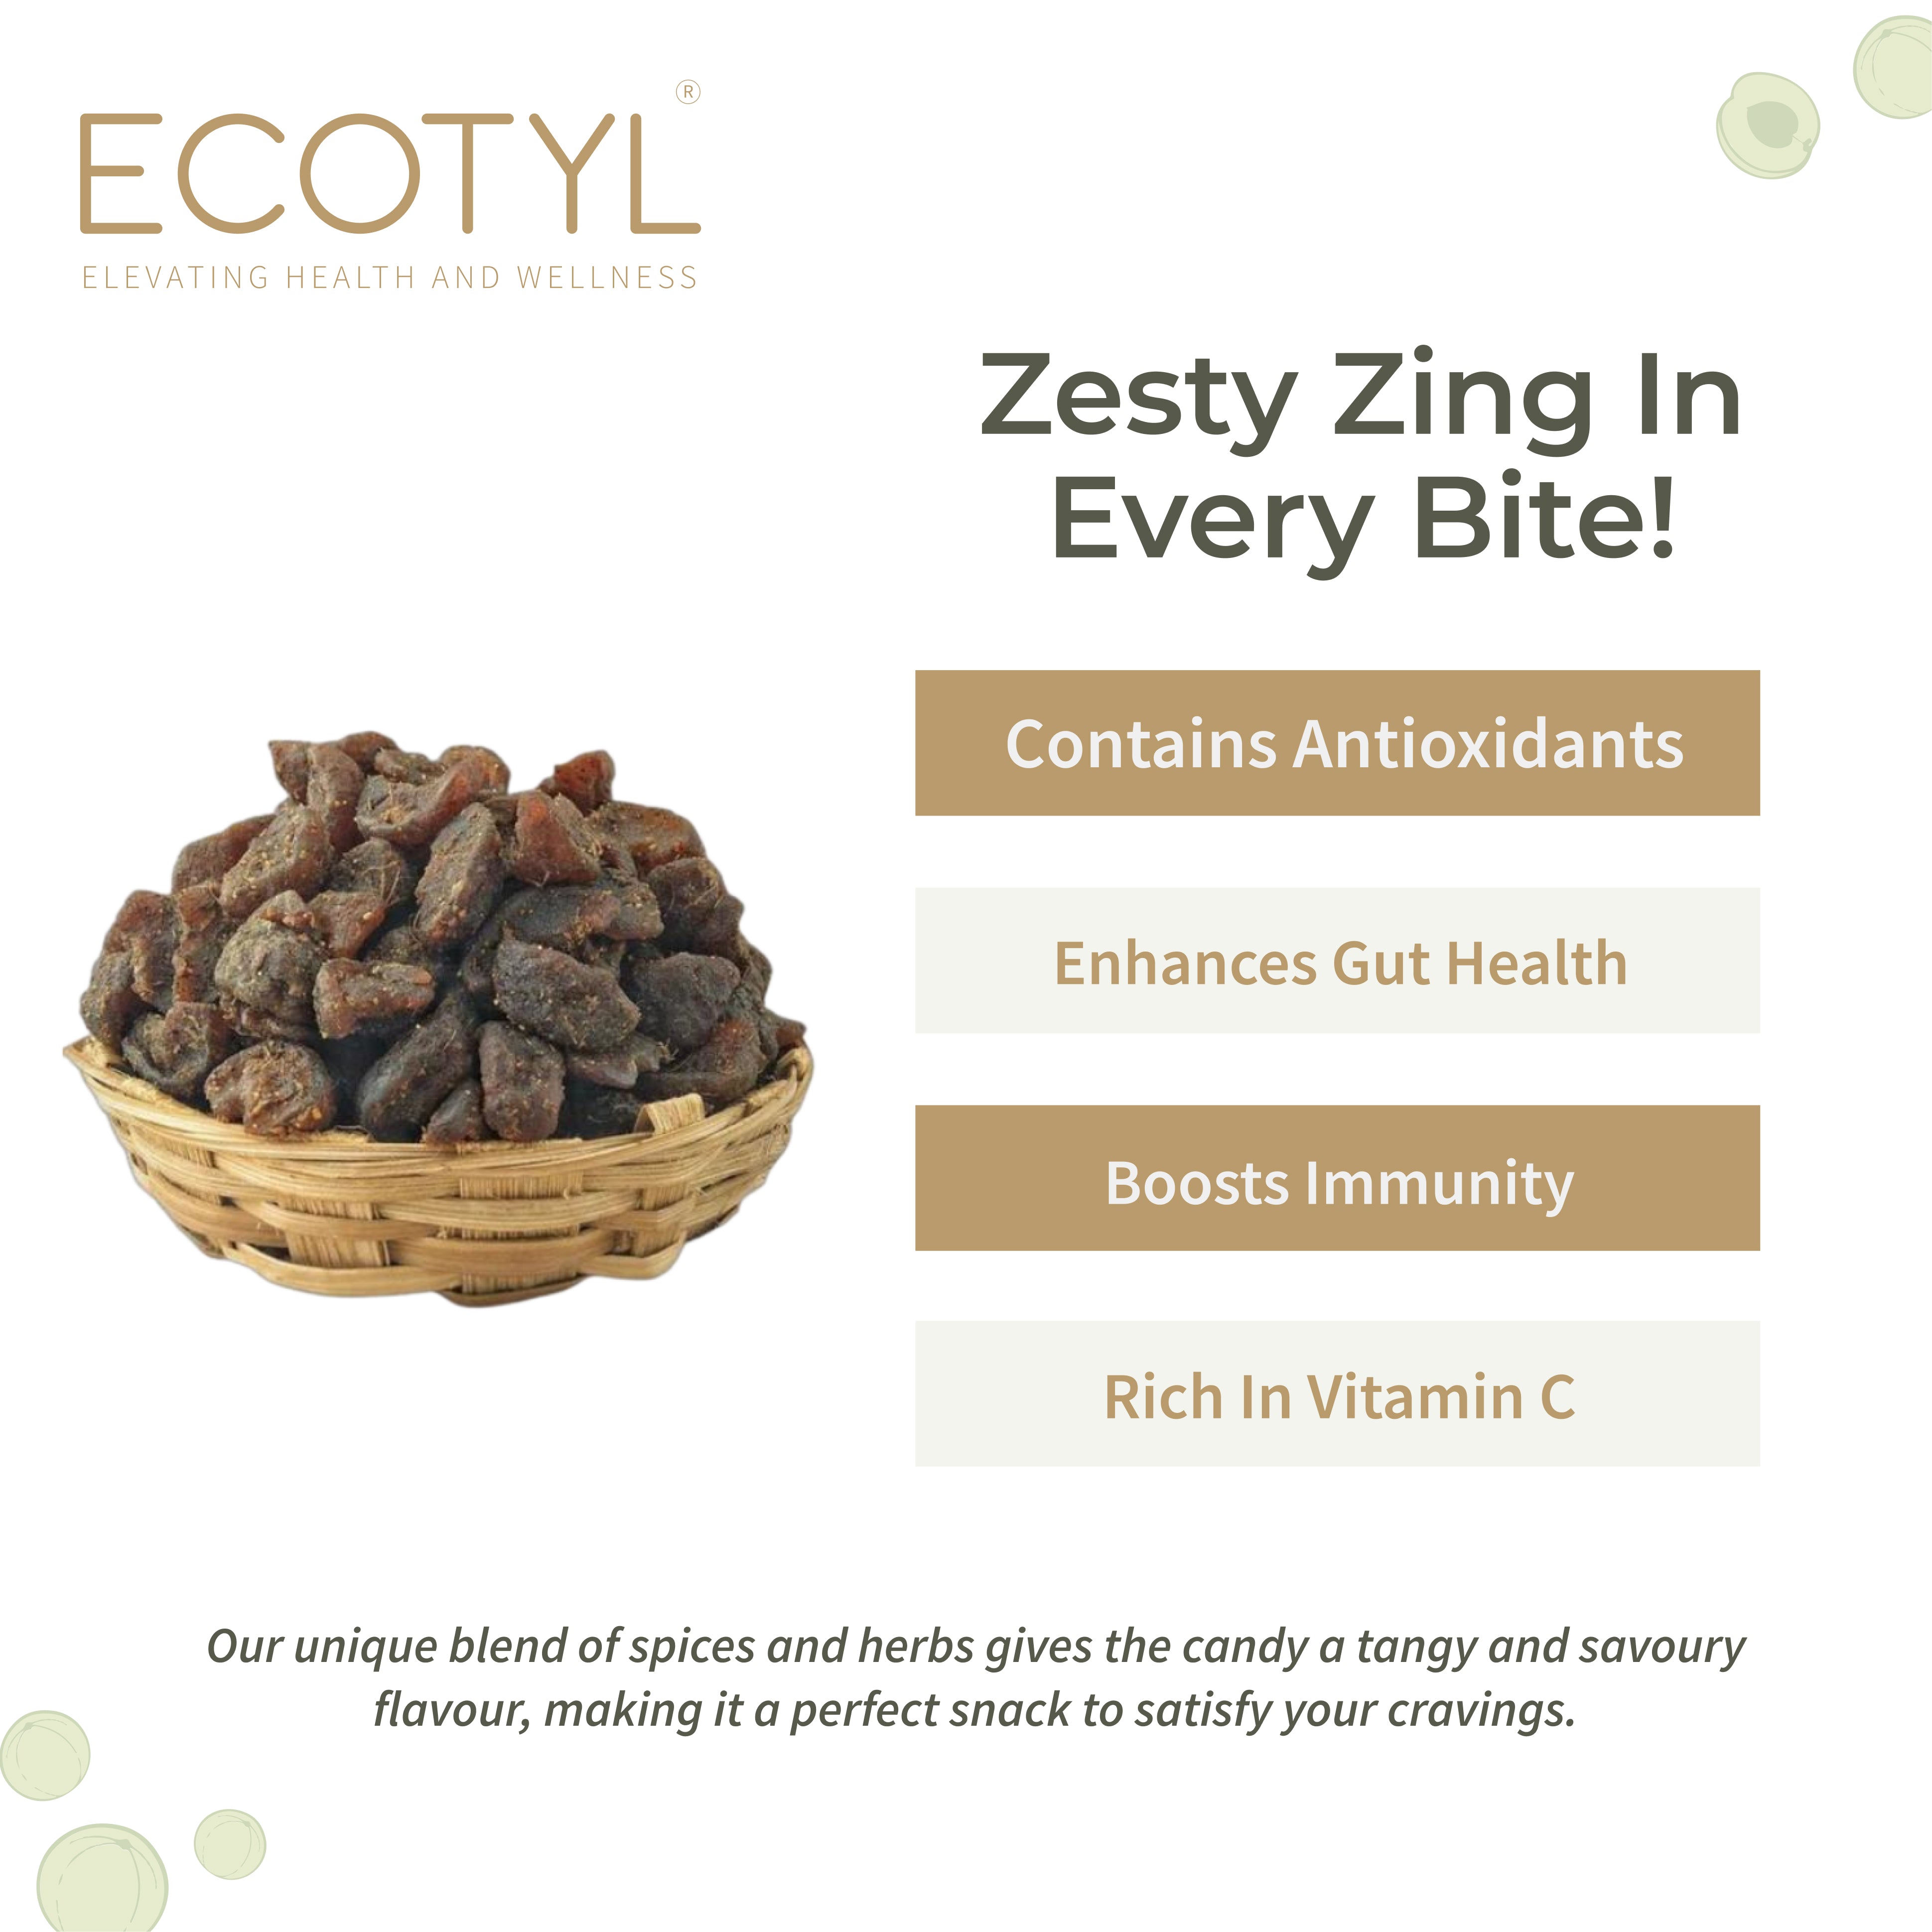 Ecotyl Amla Candy (Chatpata) | After Meal Digestive | Good for Gut Health | 250g